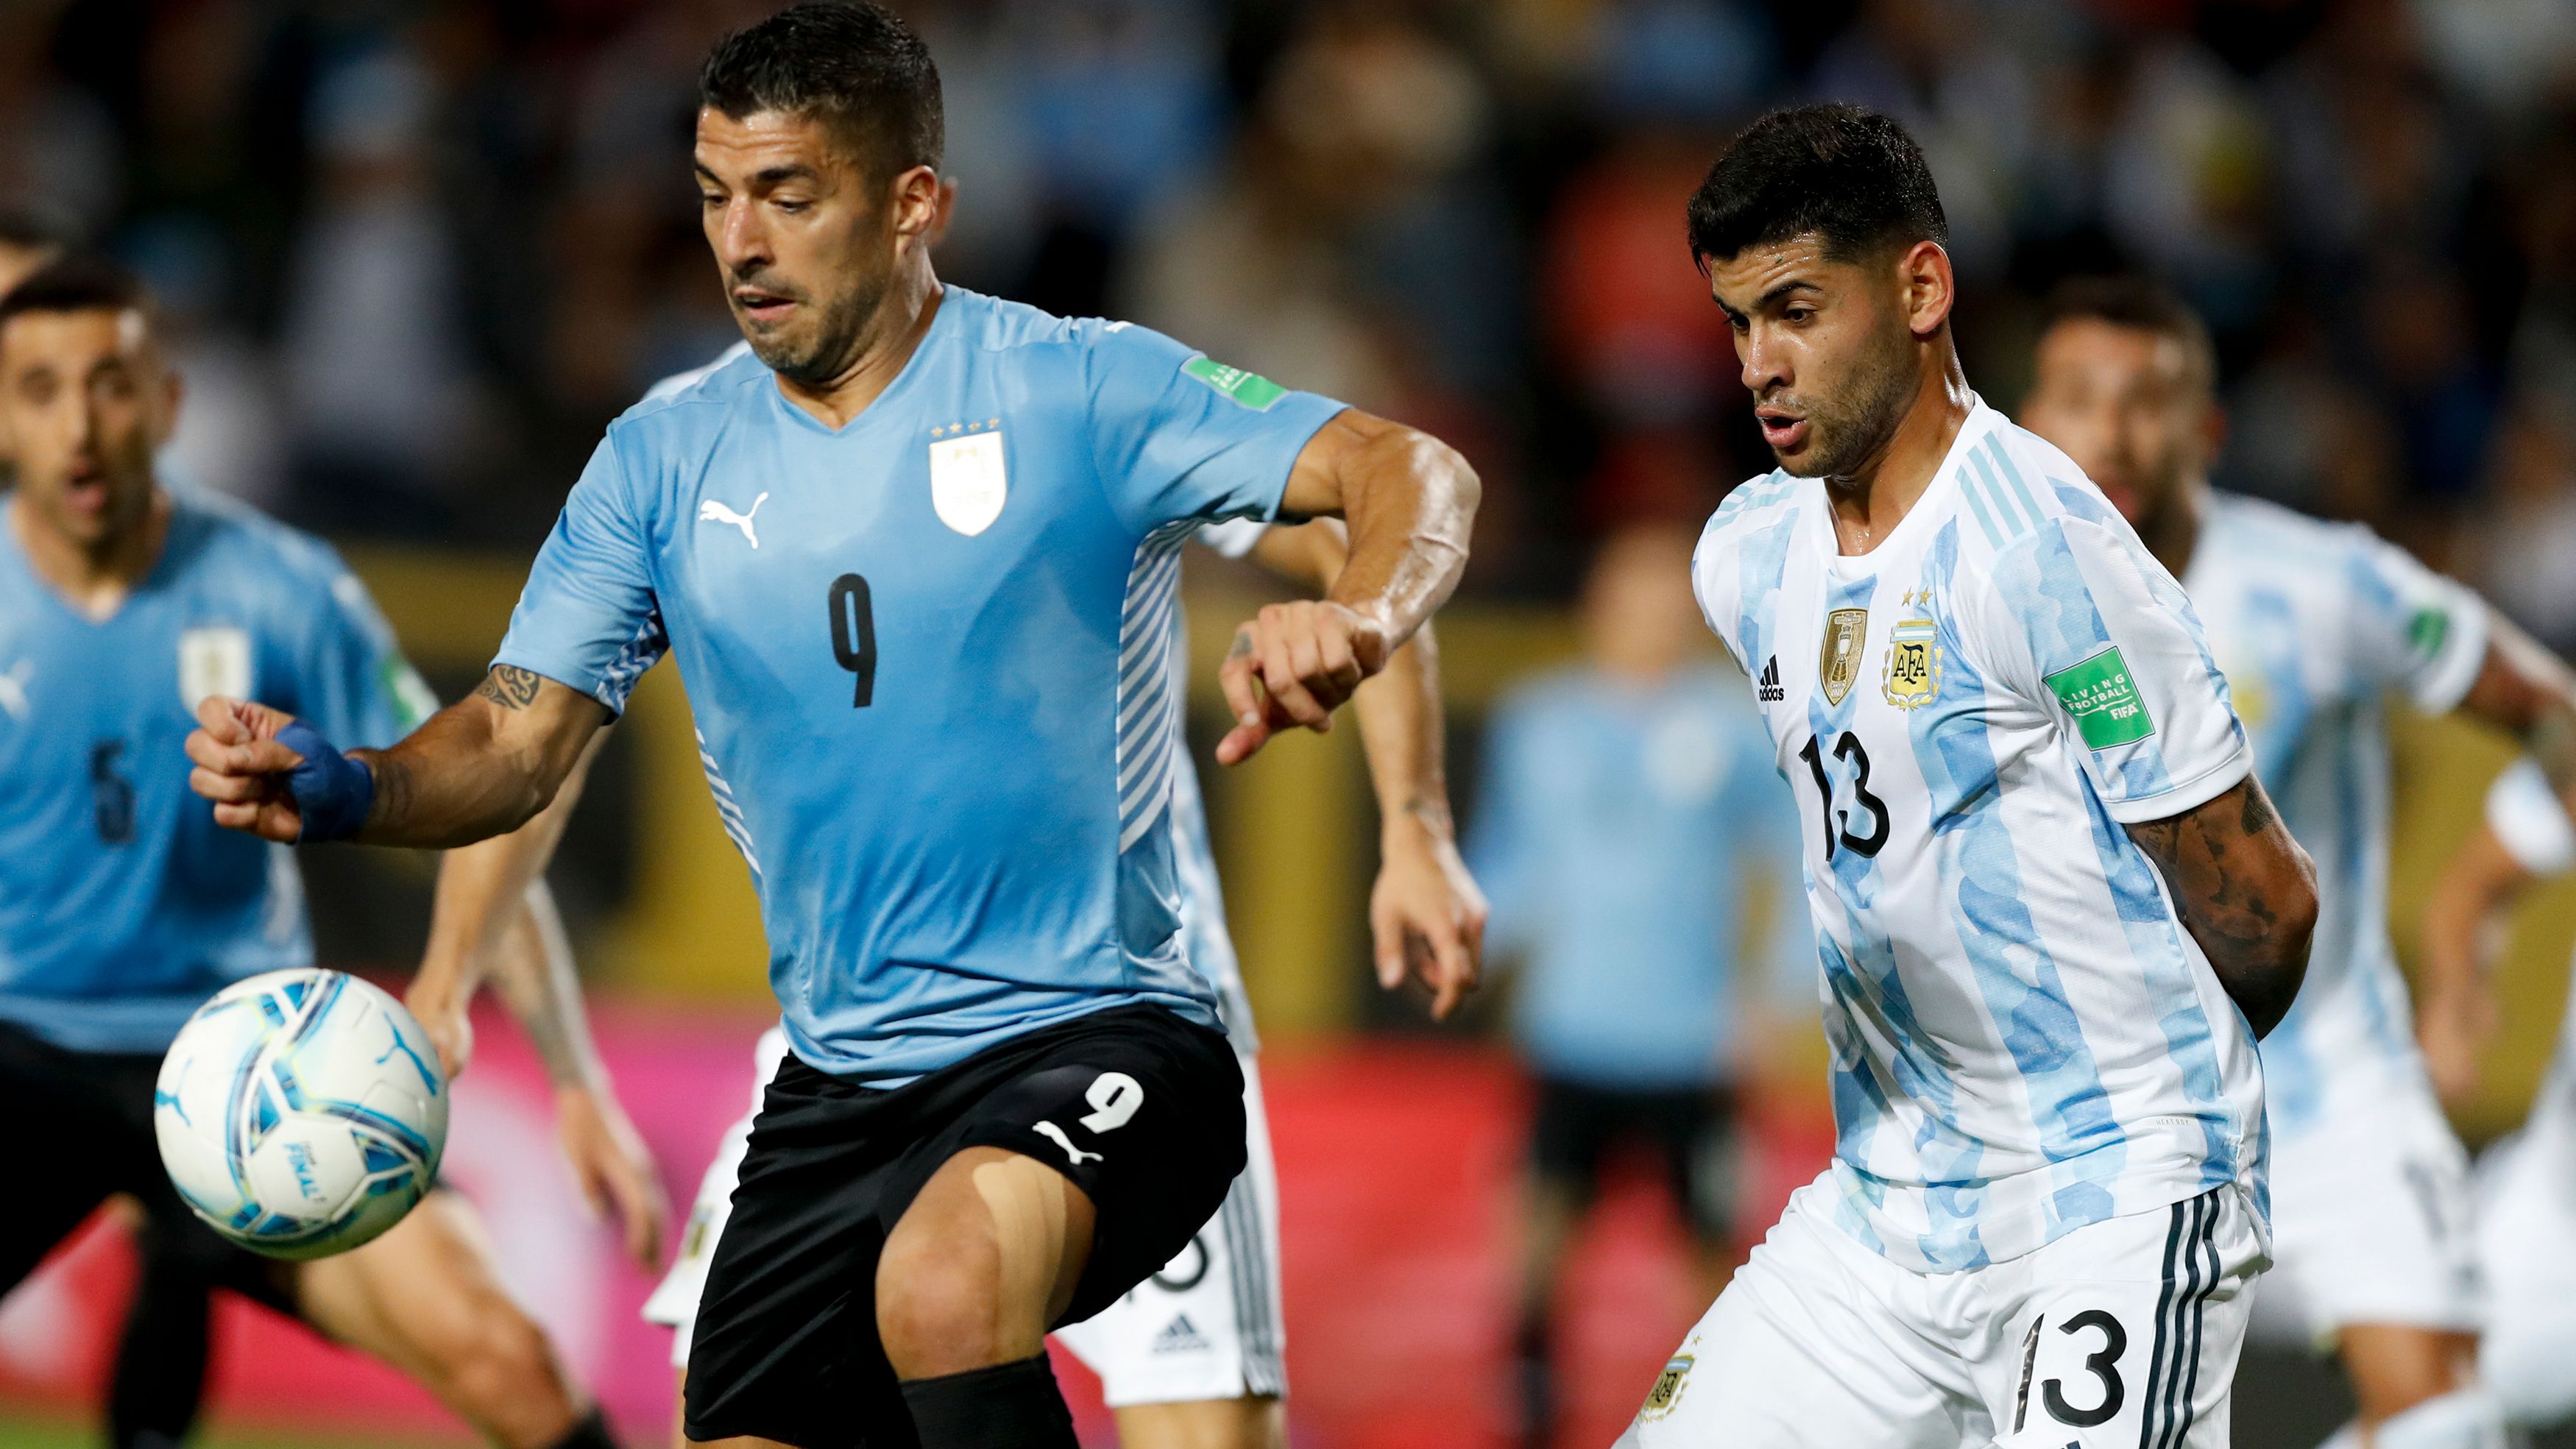 How was Luis Suarez’s performance while playing against Argentina?